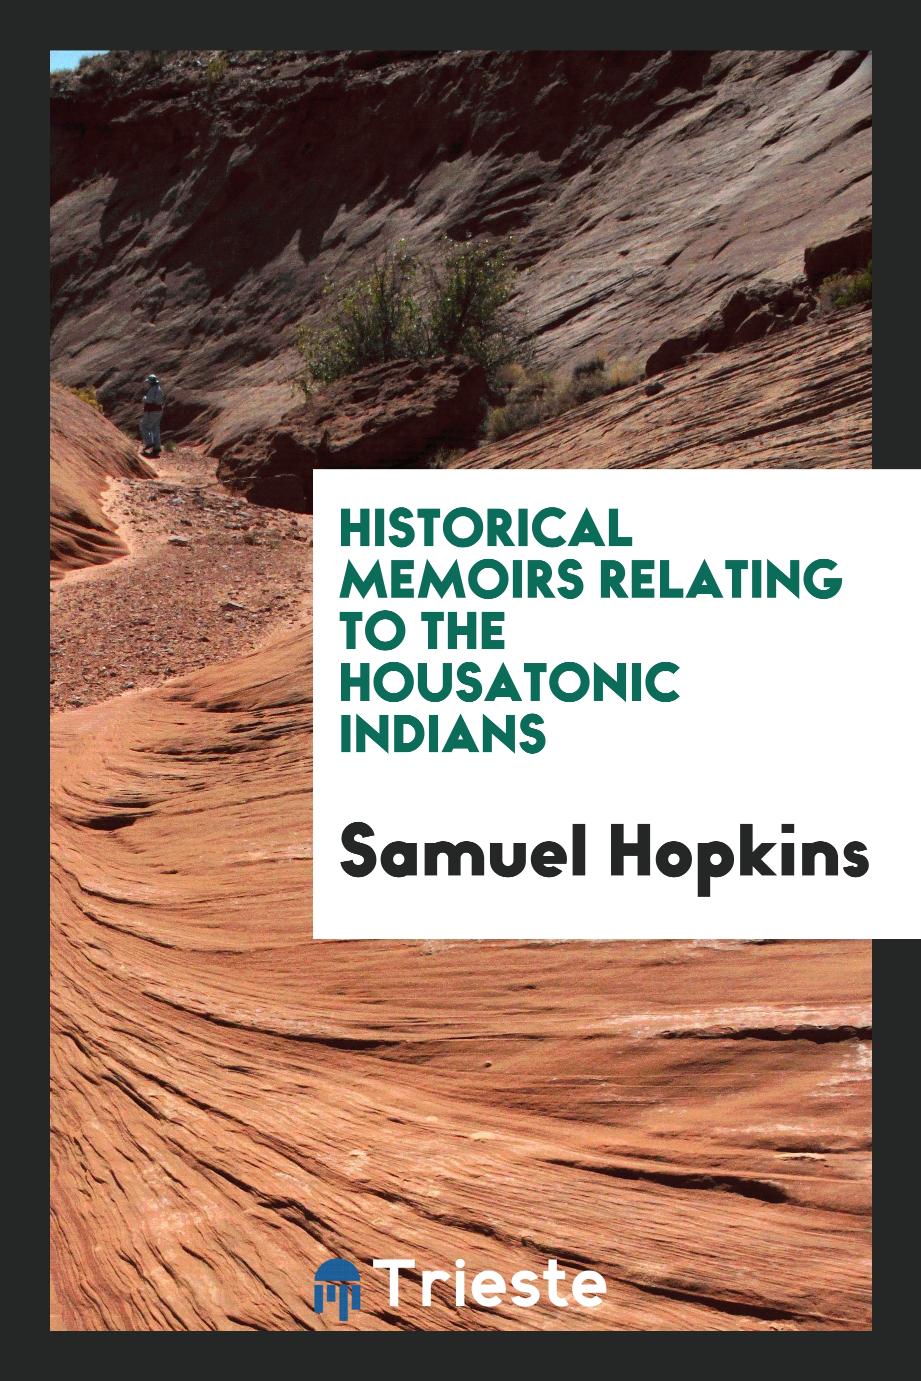 Historical memoirs relating to the Housatonic Indians